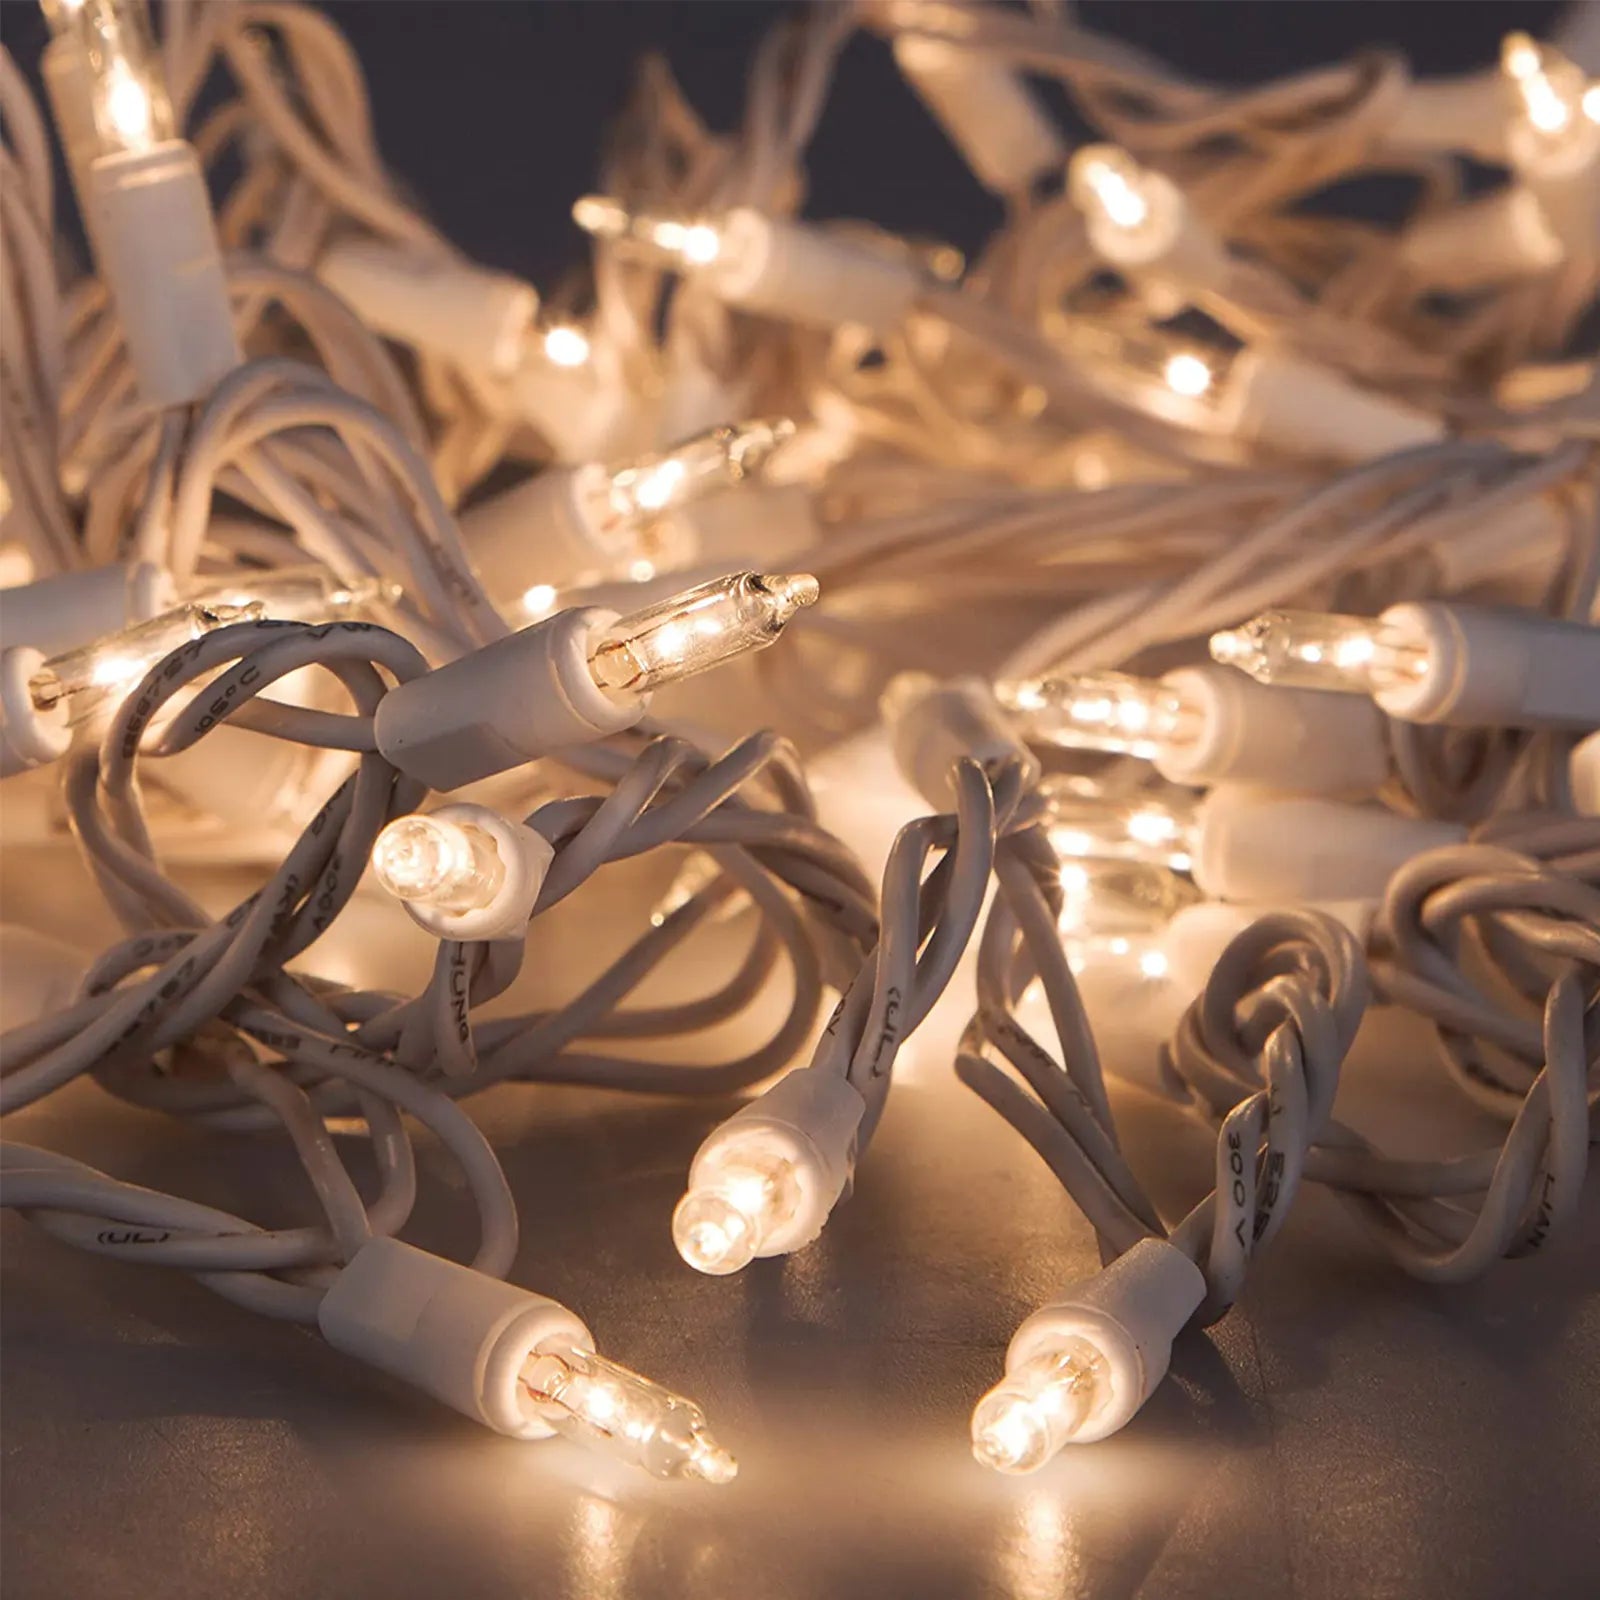 100 Clear Christmas Lights on White Wire, UL Approved